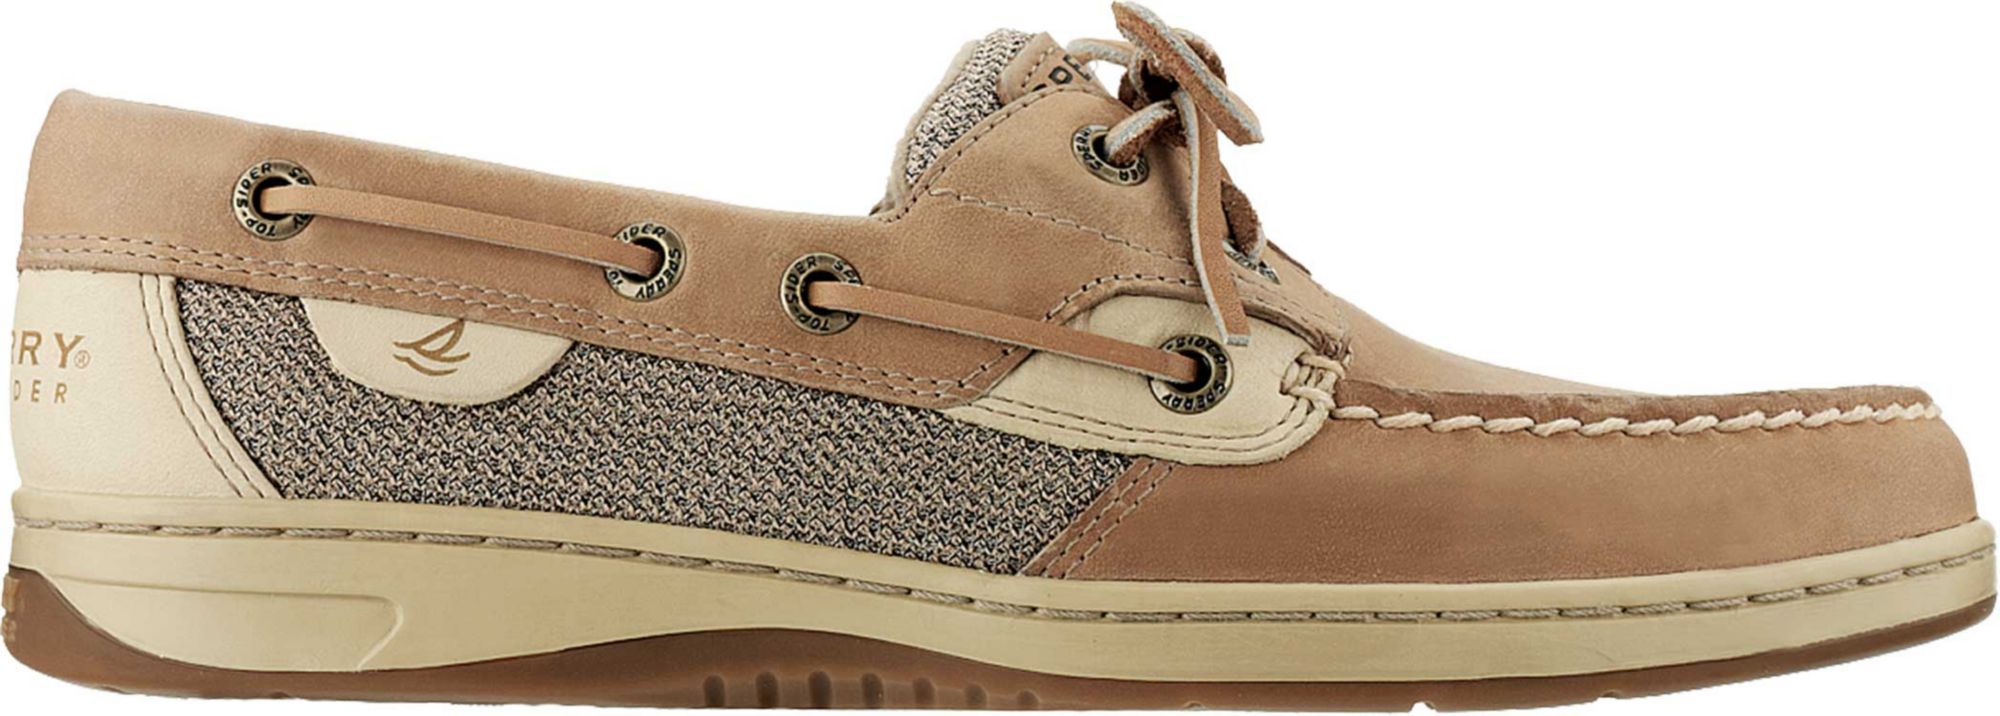 sperry top sider bluefish